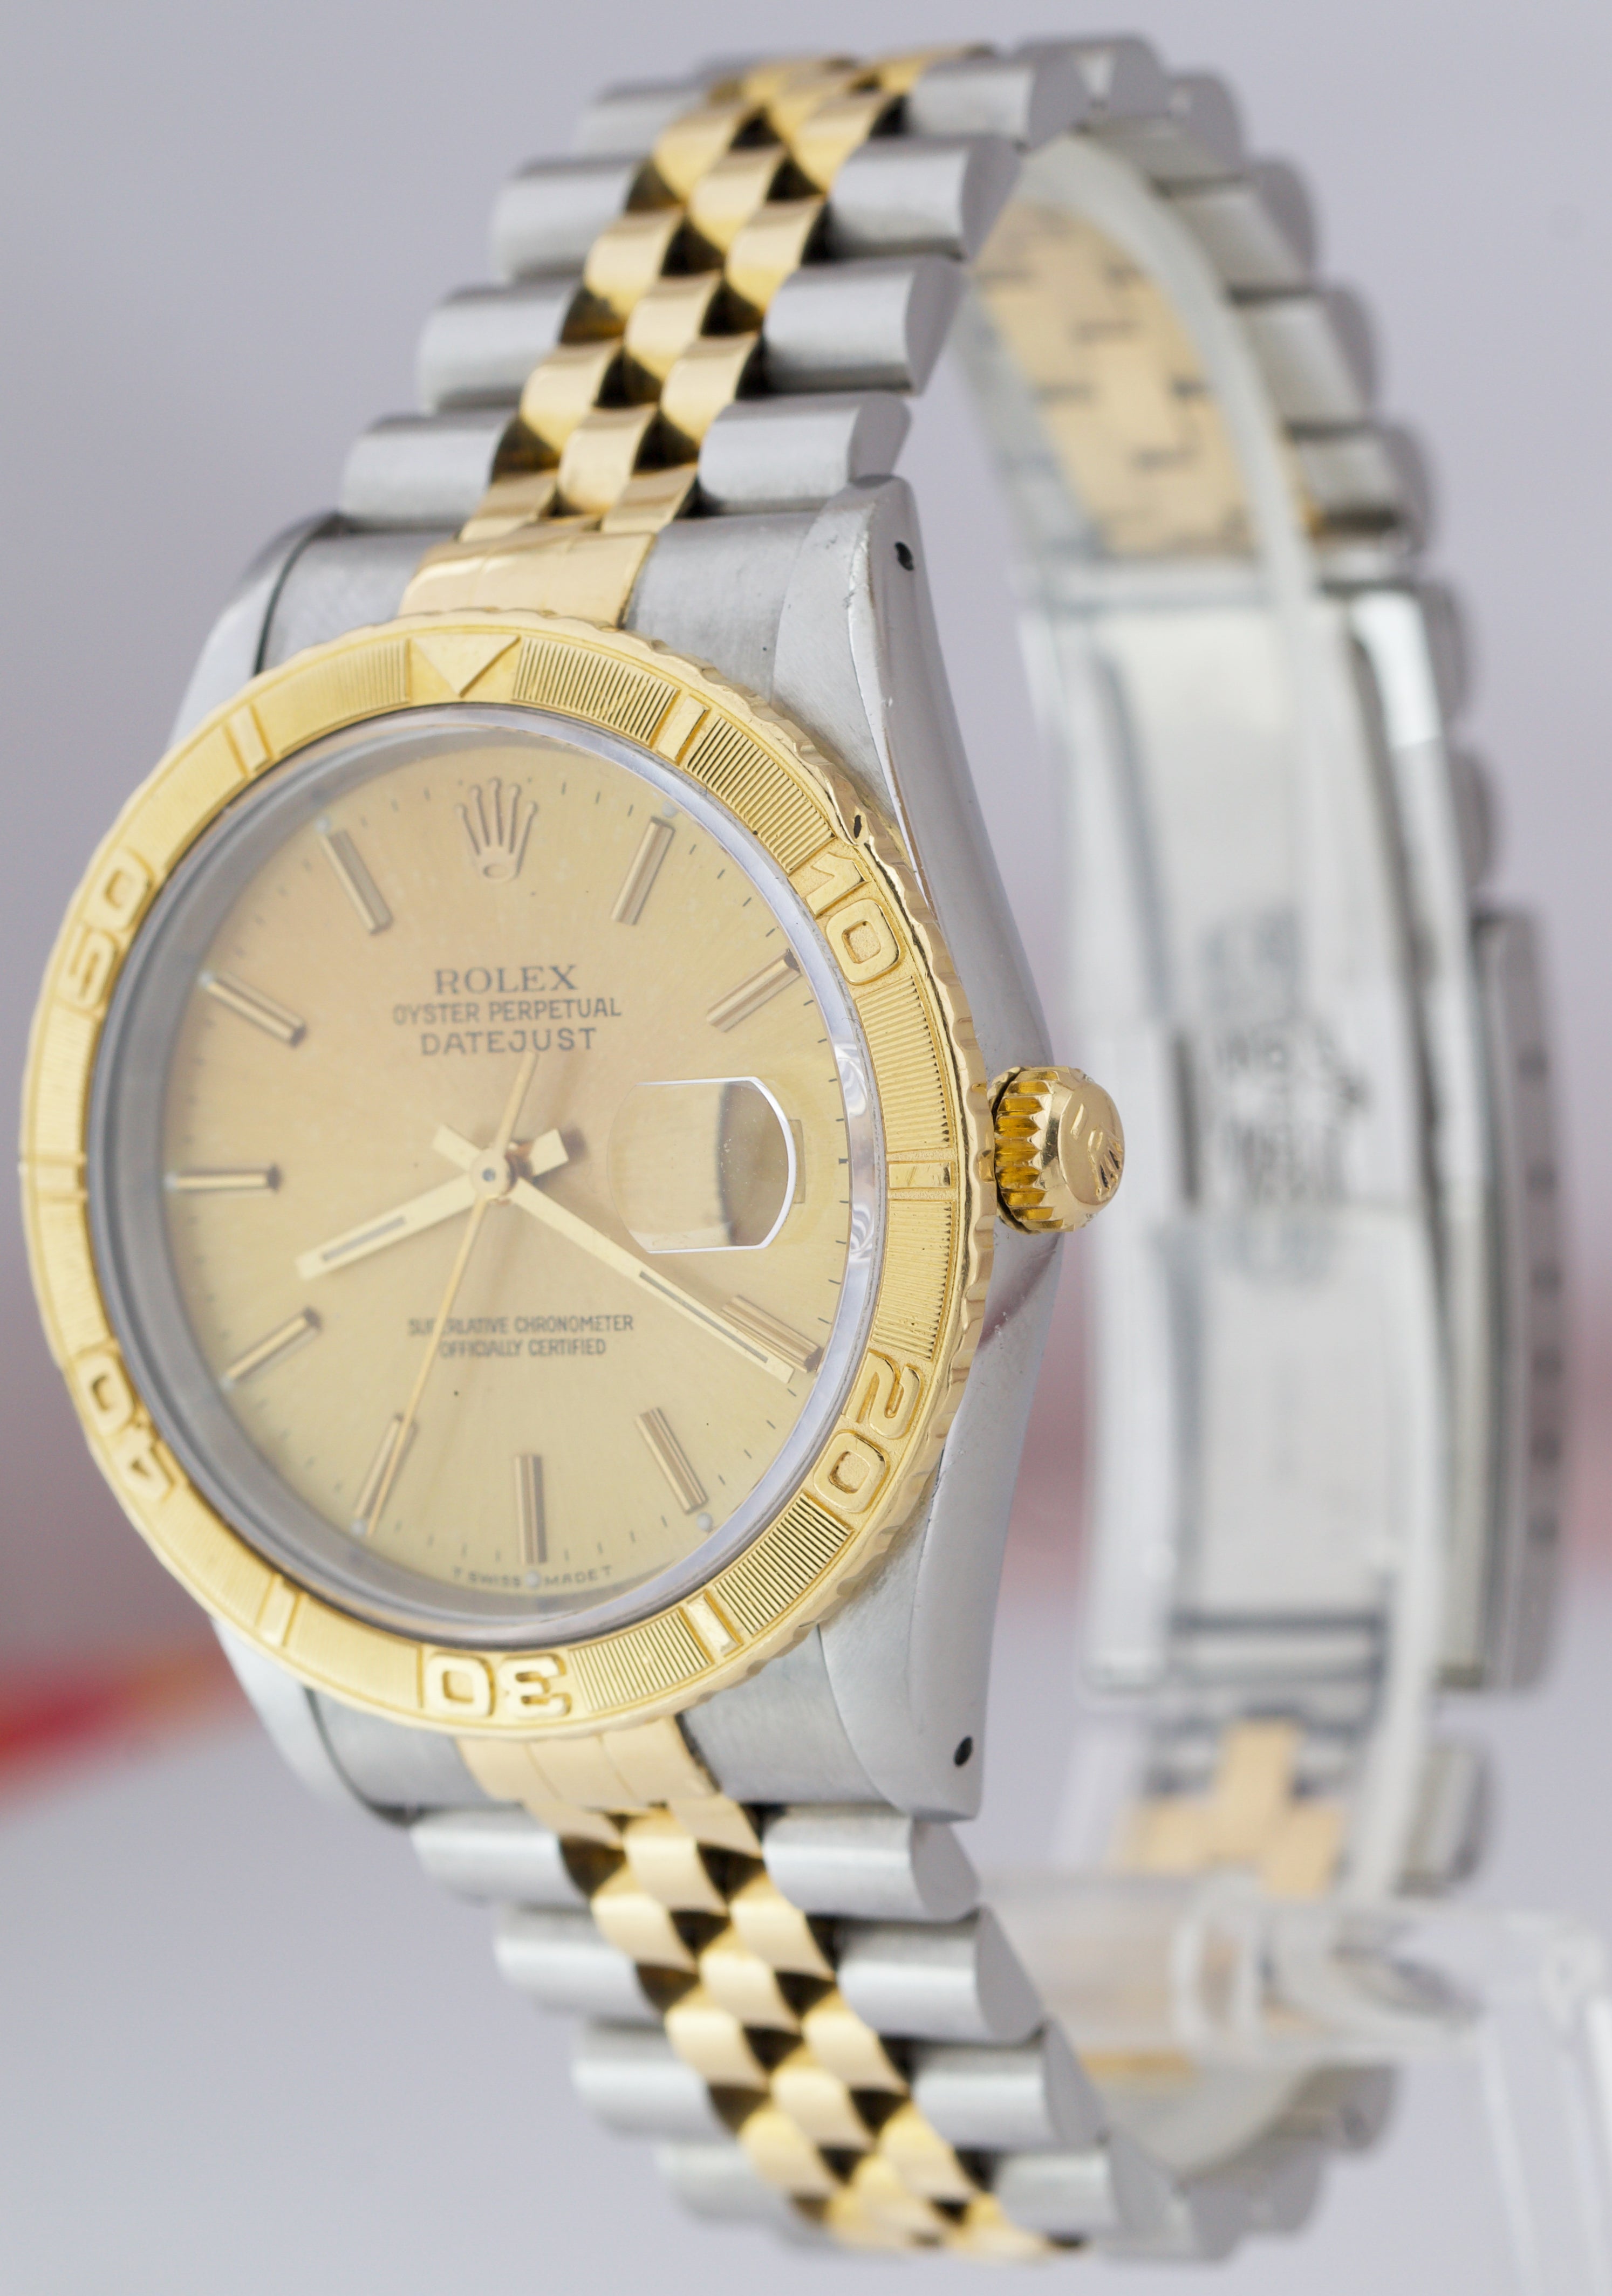 Rolex DateJust Turn-O-Graph Two-Tone Champagne Thunderbird Jubilee Watch 16263